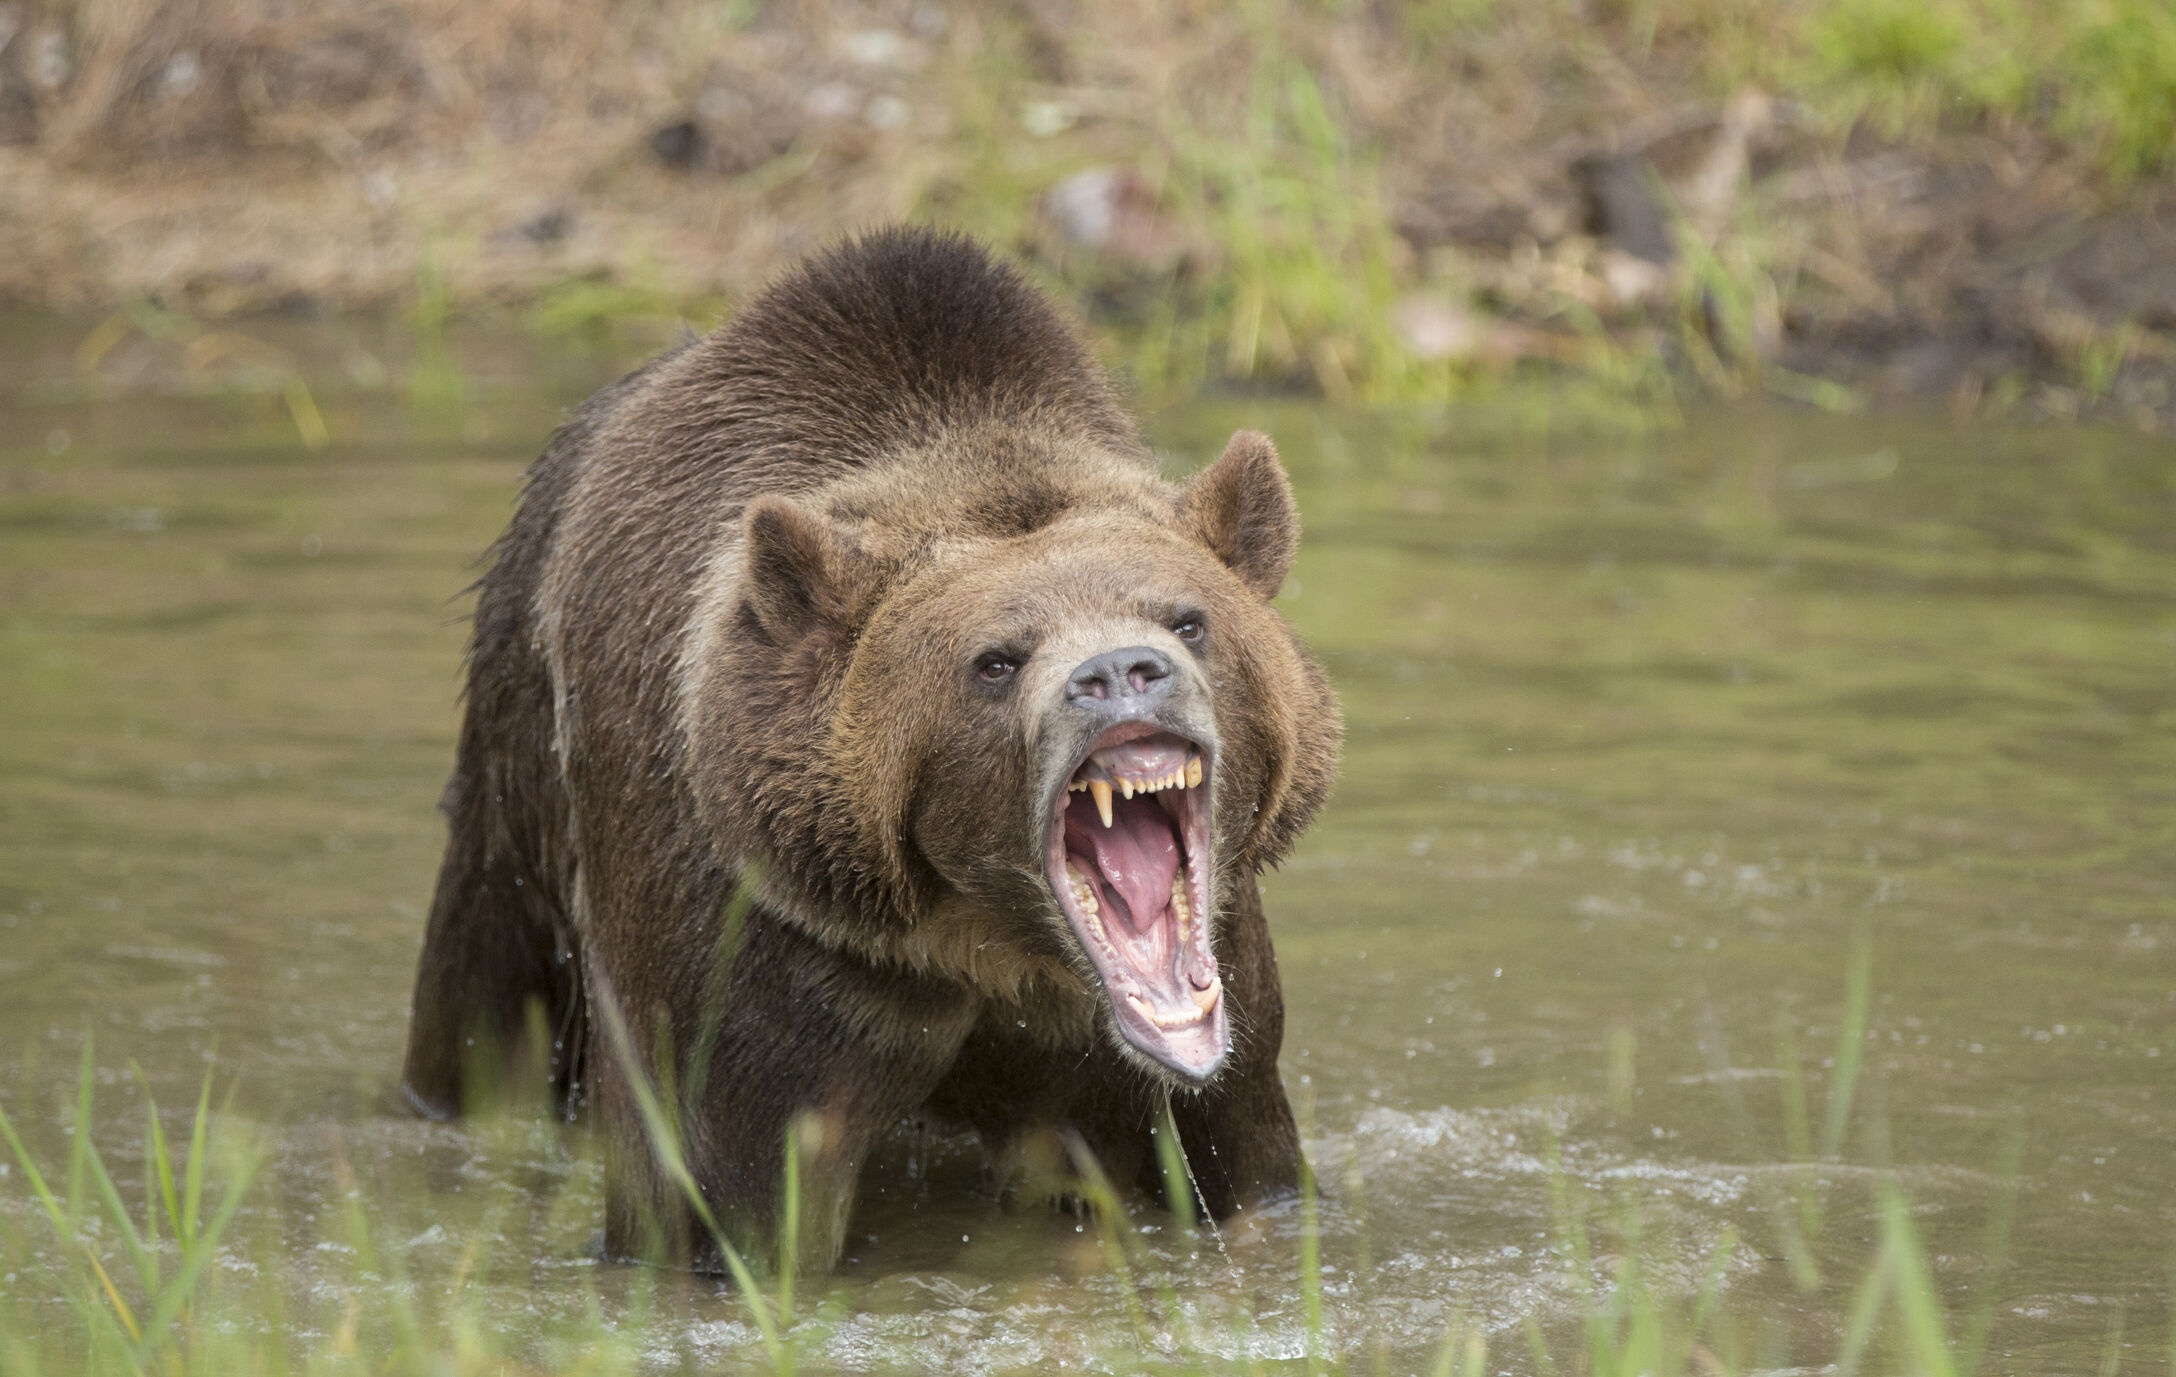 Feds again consider reintroducing grizzlies to North Cascades